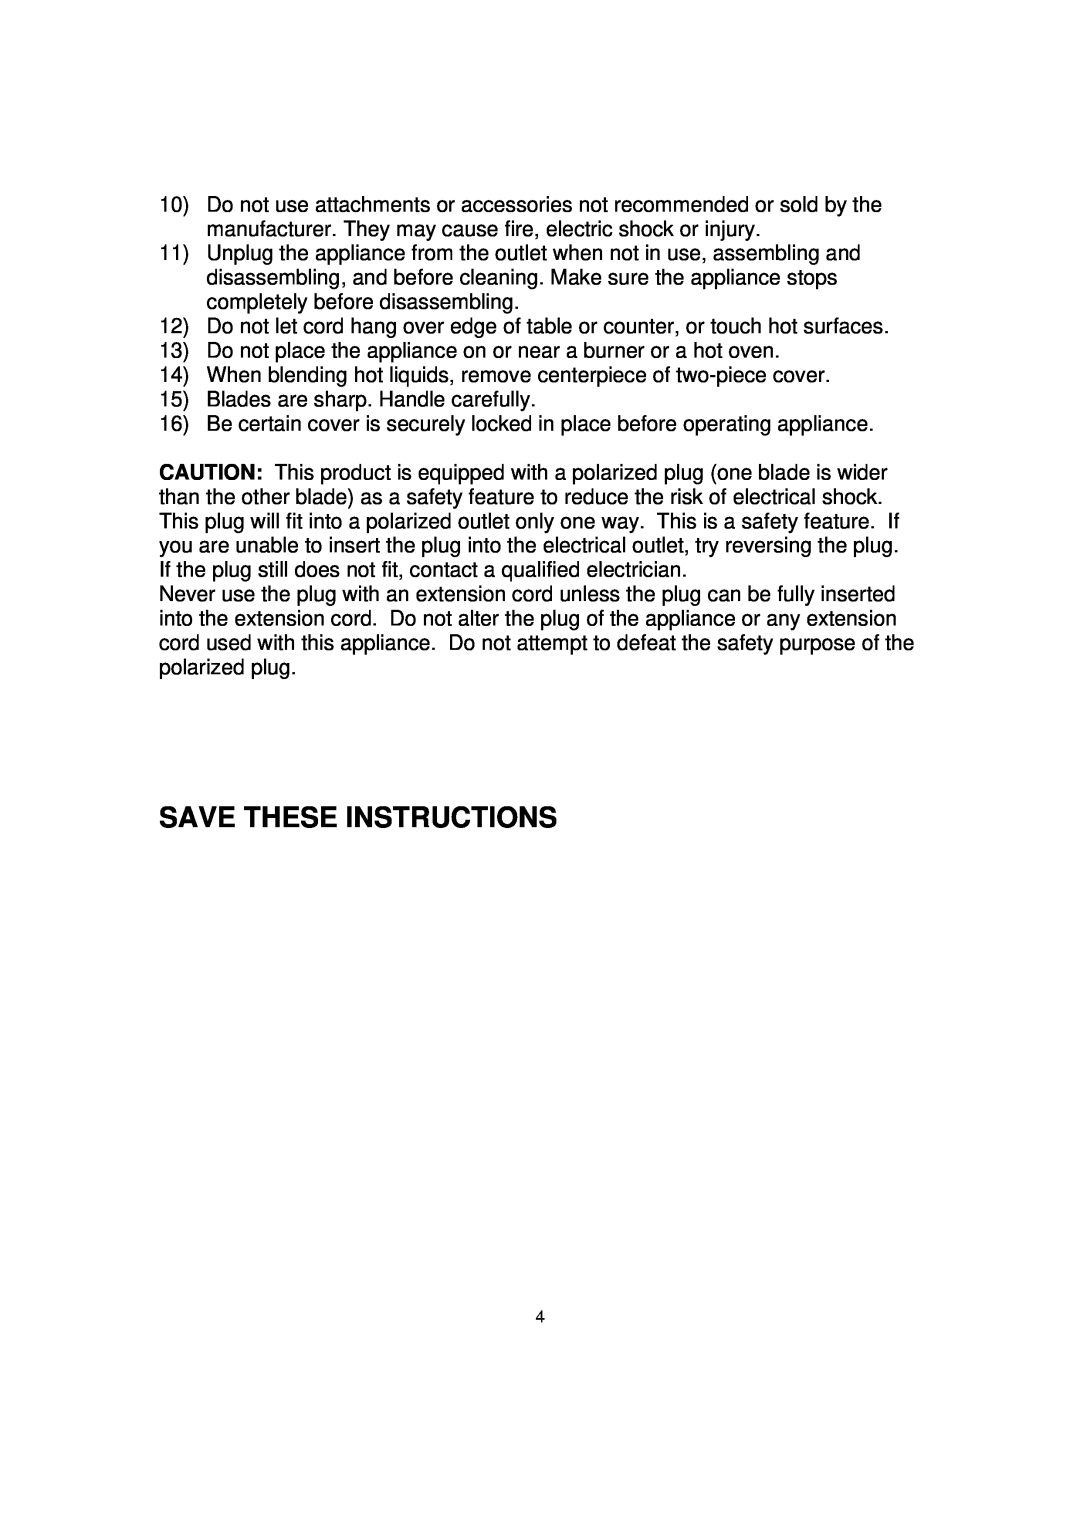 Magic Chef MCBL5CG operating instructions Save These Instructions 